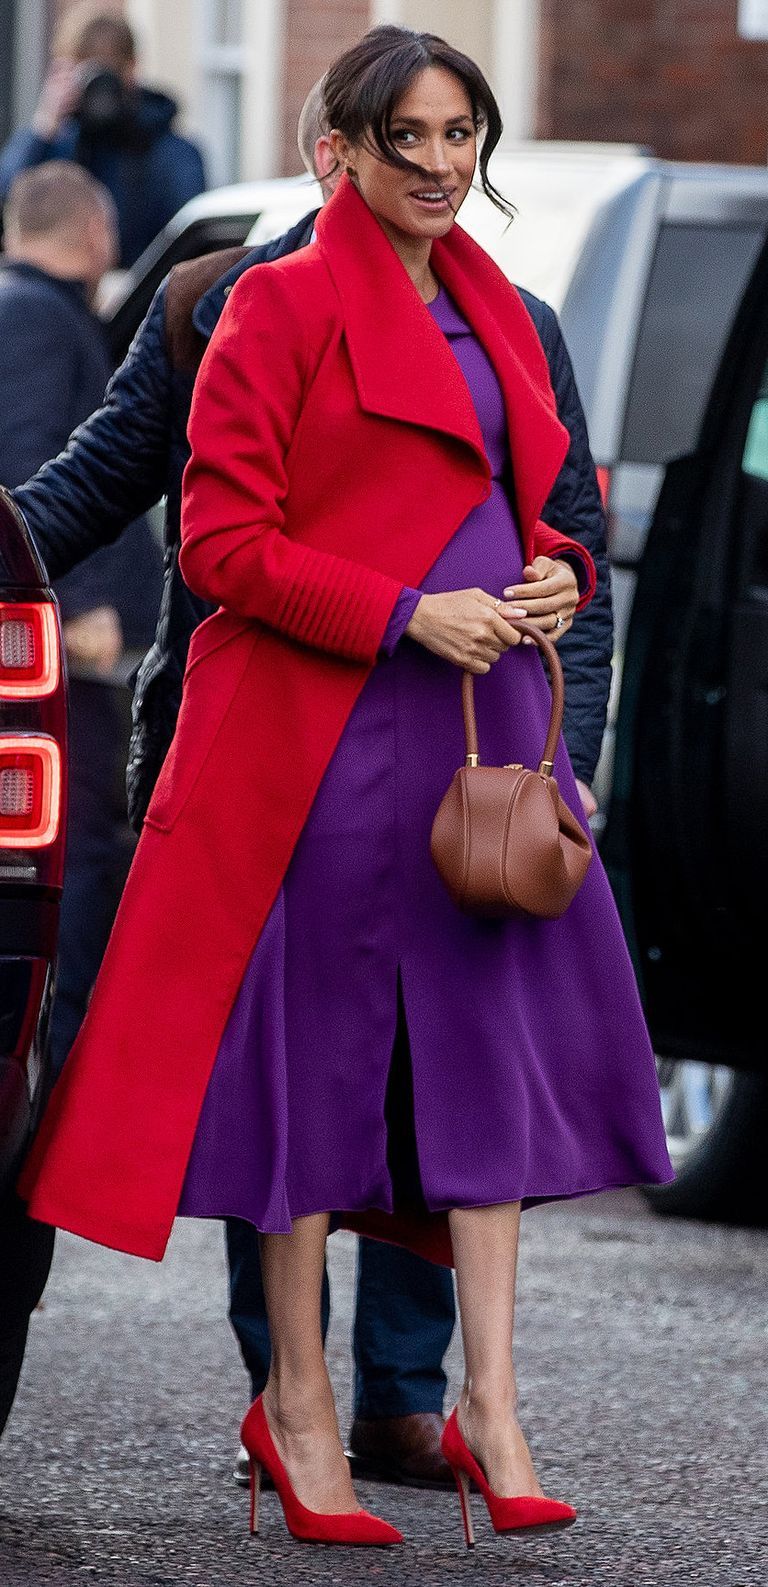 Meghan Markle's red dress and purple coat tribute to Princess Diana?